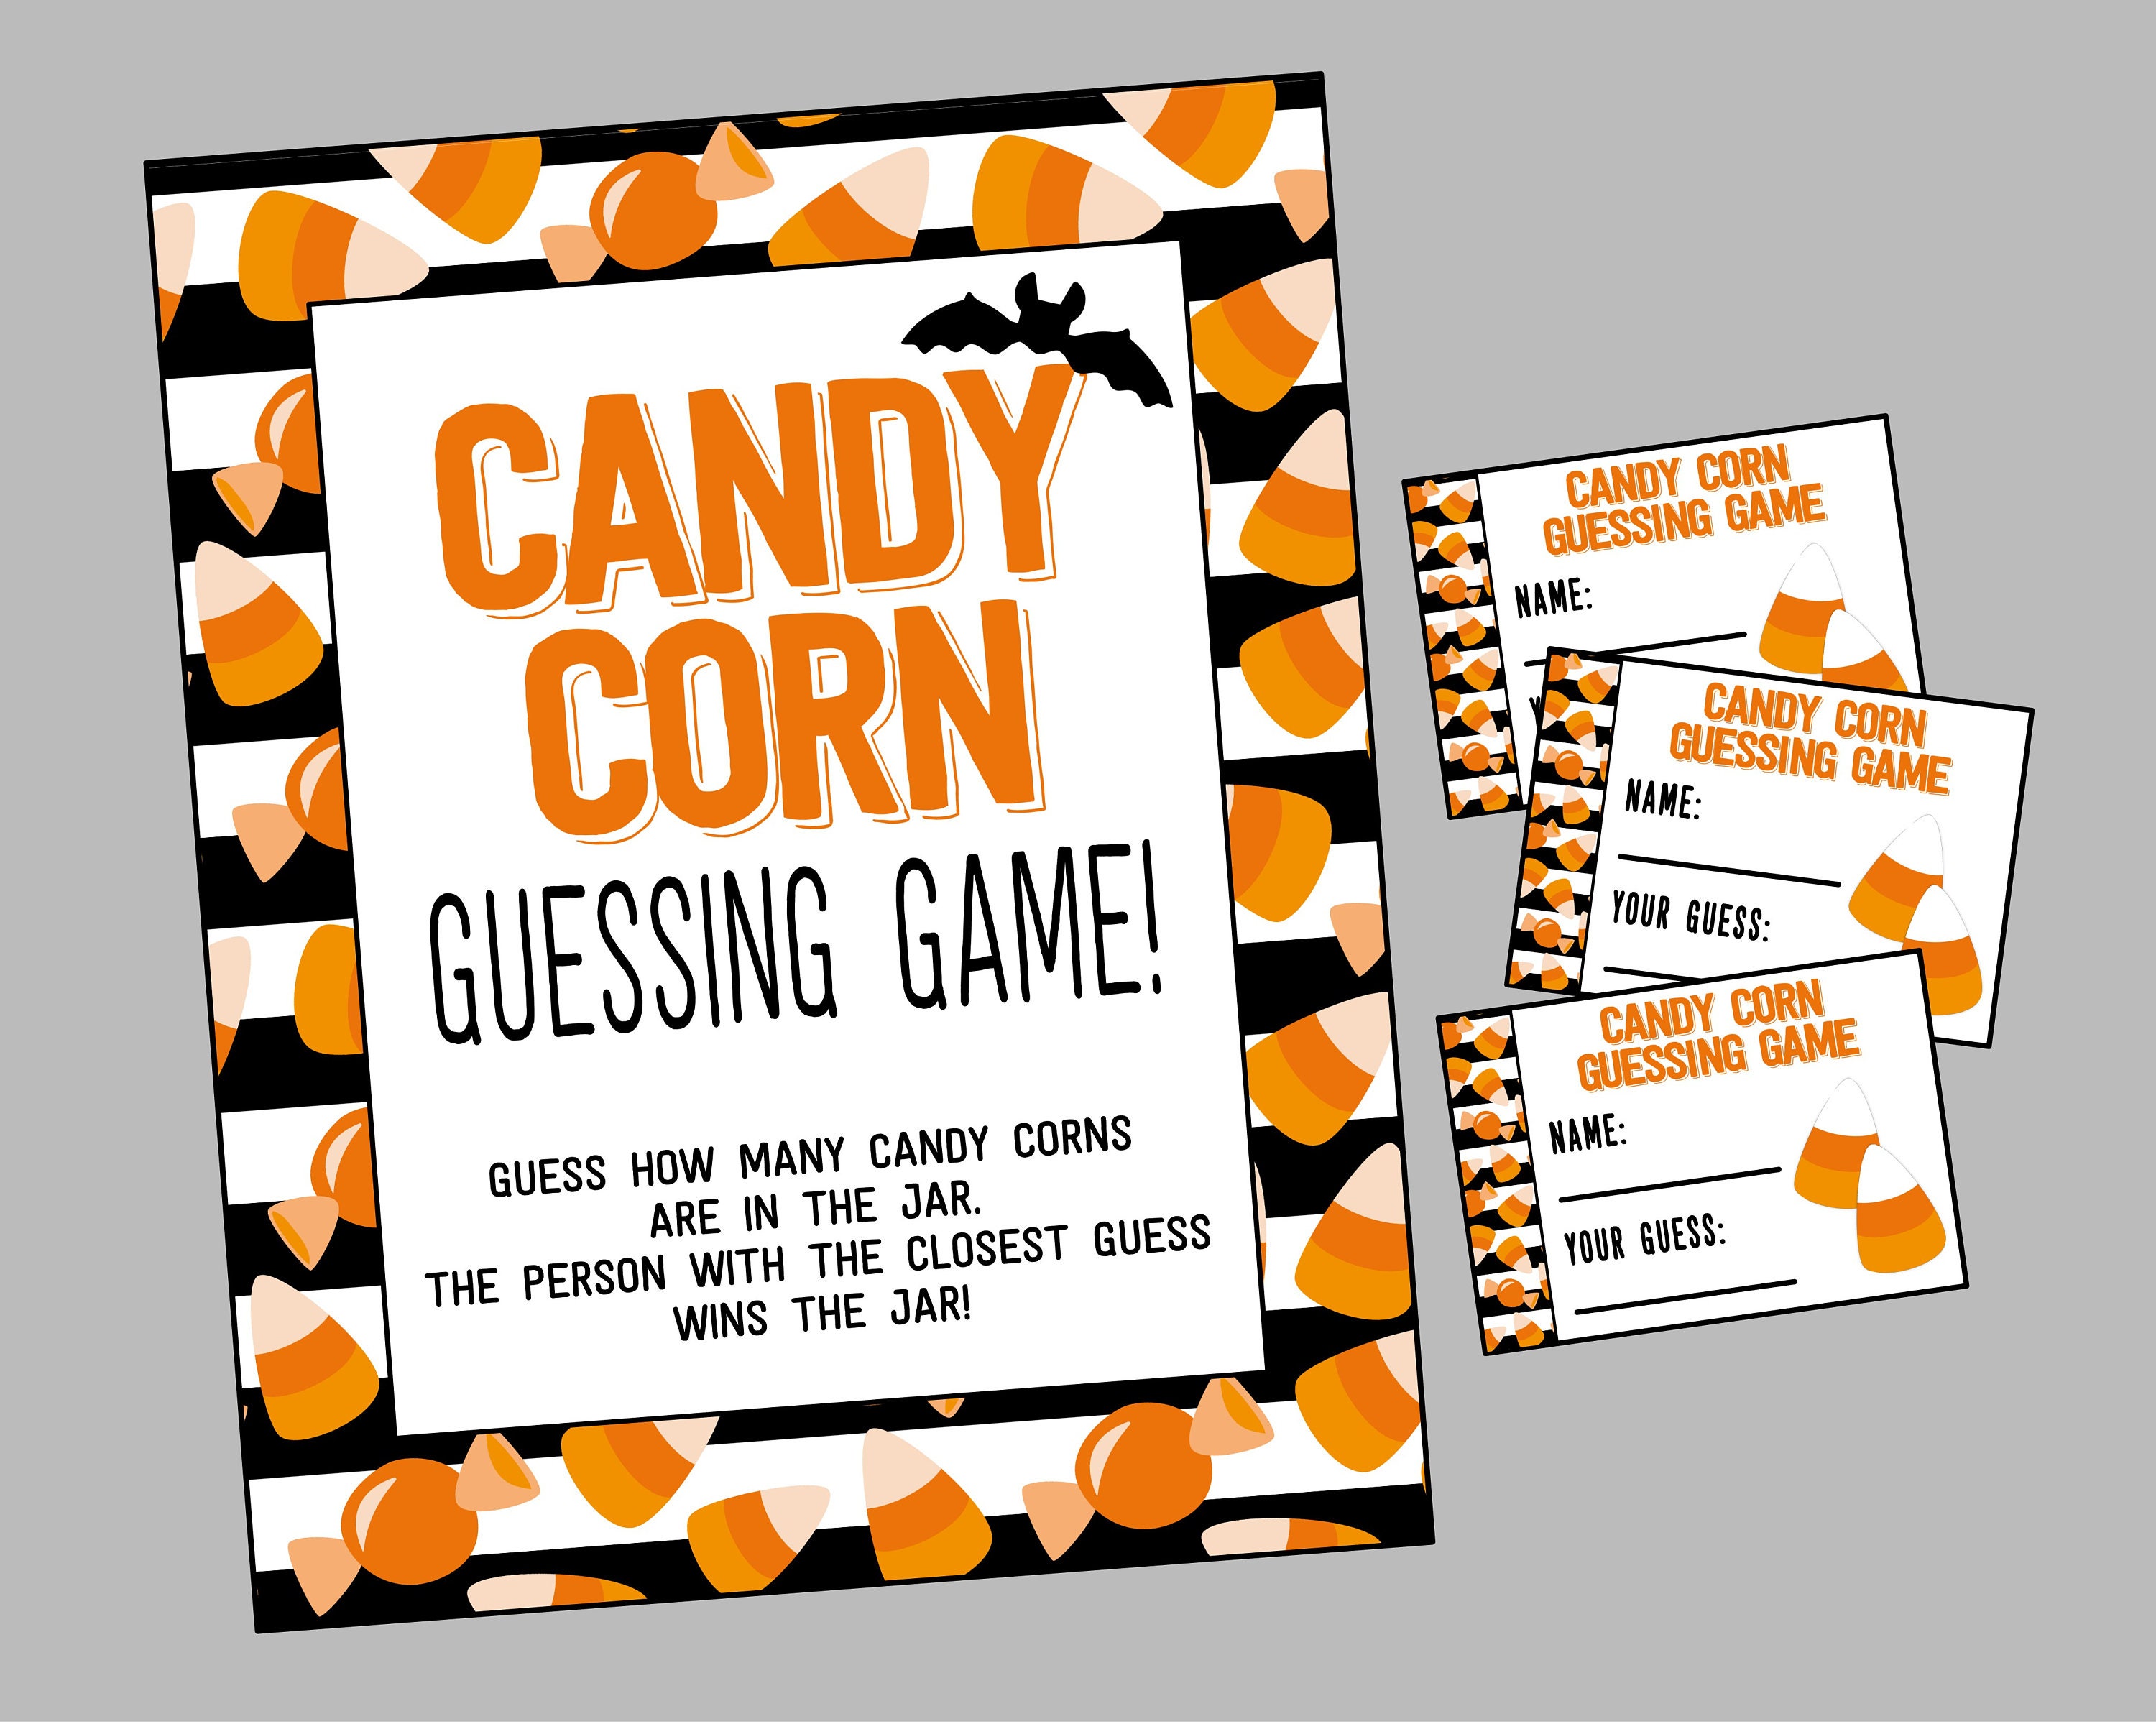 Candy Guessing Game Rules